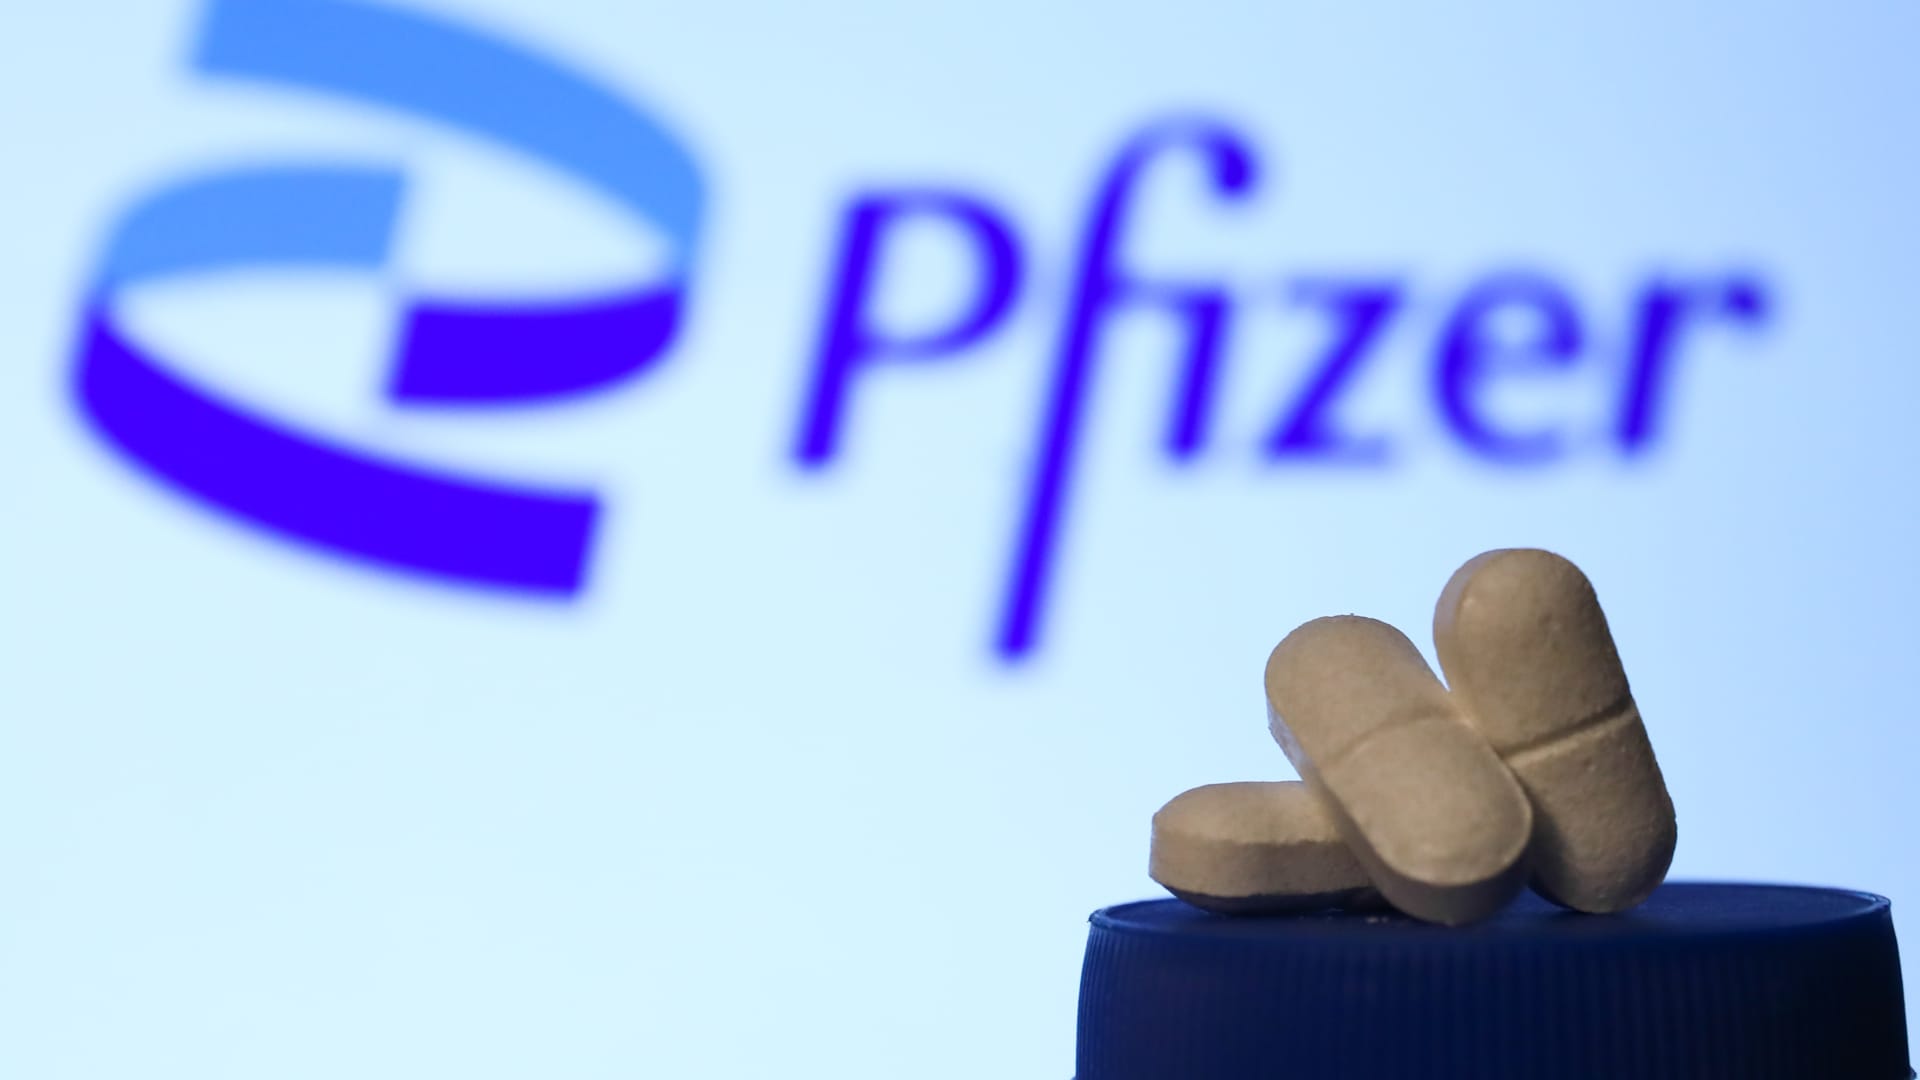 Pfizer is betting big on cancer drugs to turn business around after Covid decline – here's what to know